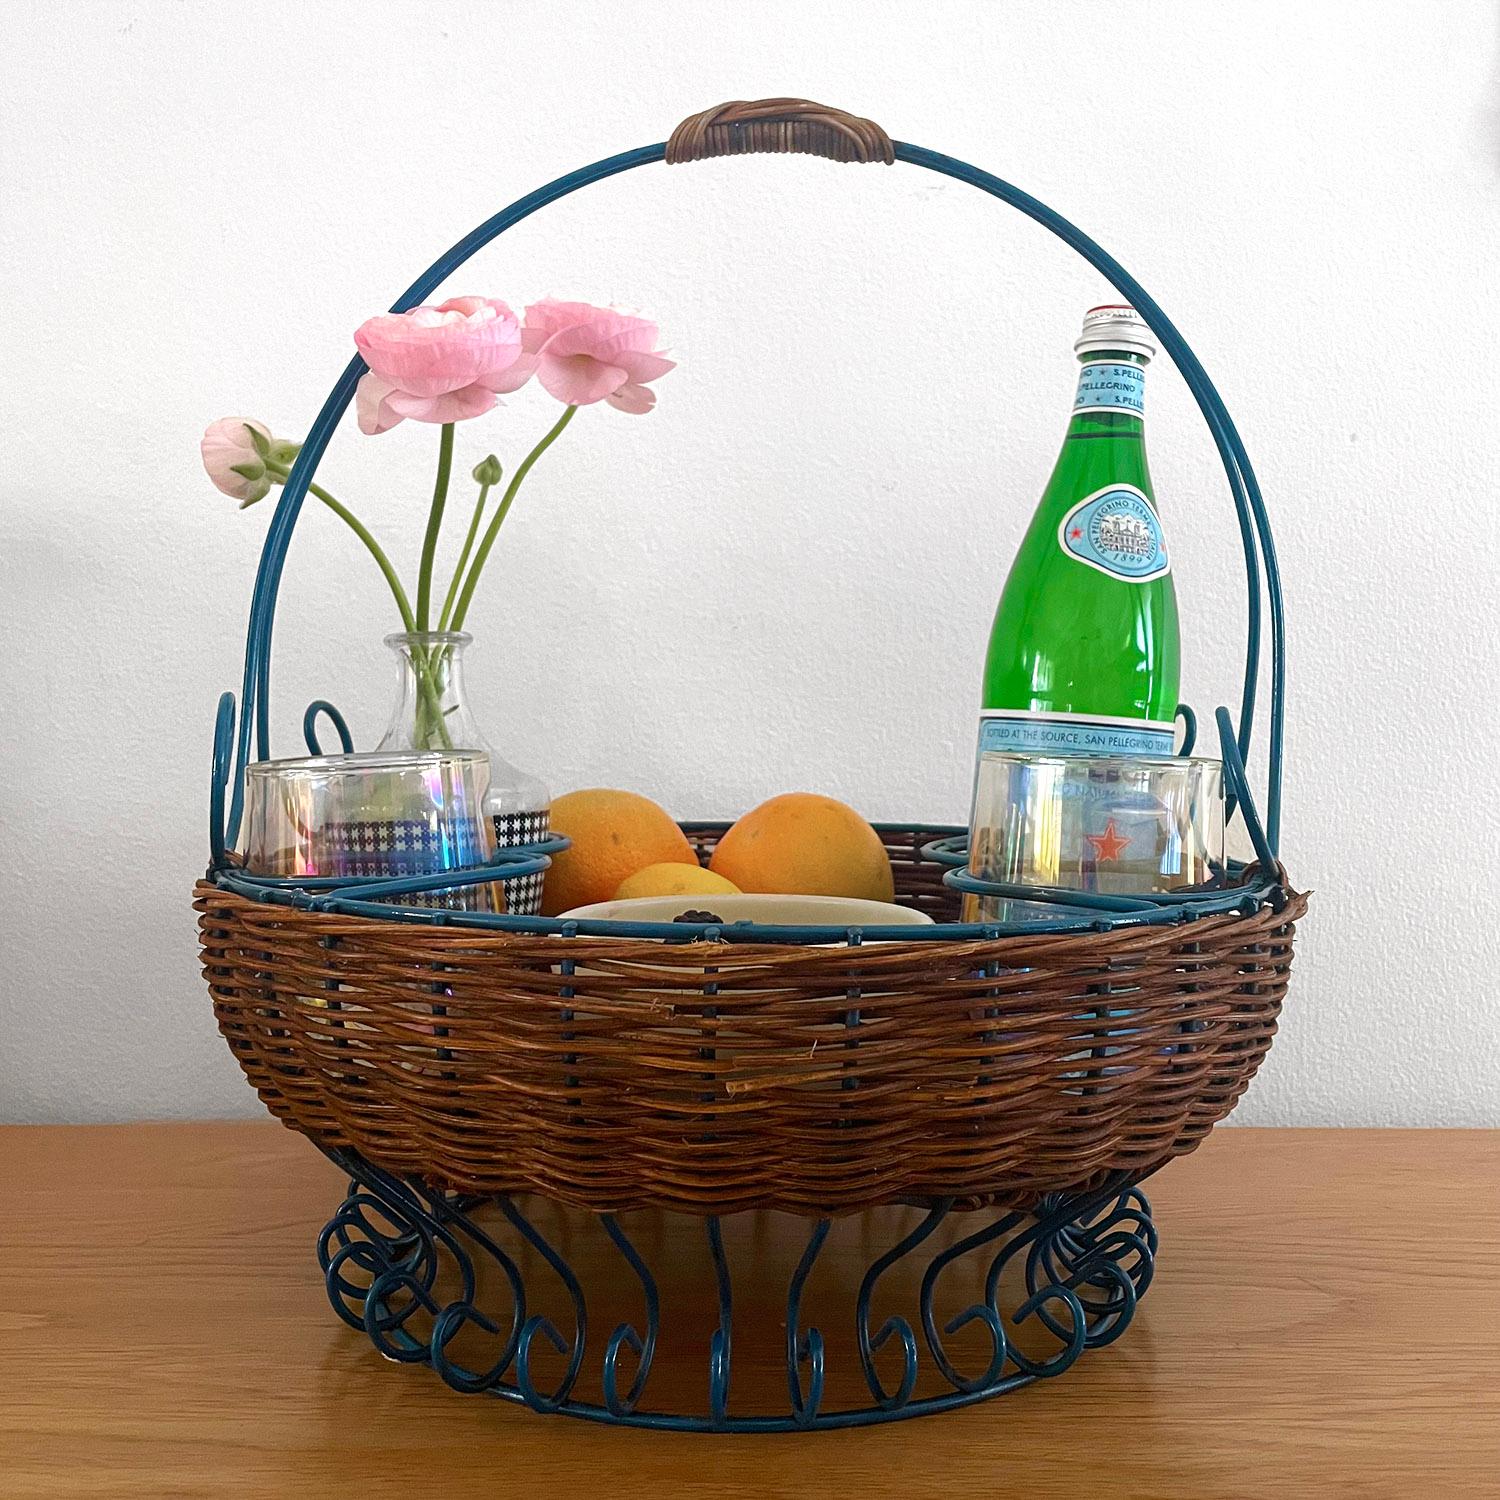 French wicker & iron service basket
France, 1950’s
This is a charming piece
Intricately woven wicker around deep blue painted iron frame
Beautifully sculpted frame and raised platform base with whimsical accents throughout
Four areas for bottles or